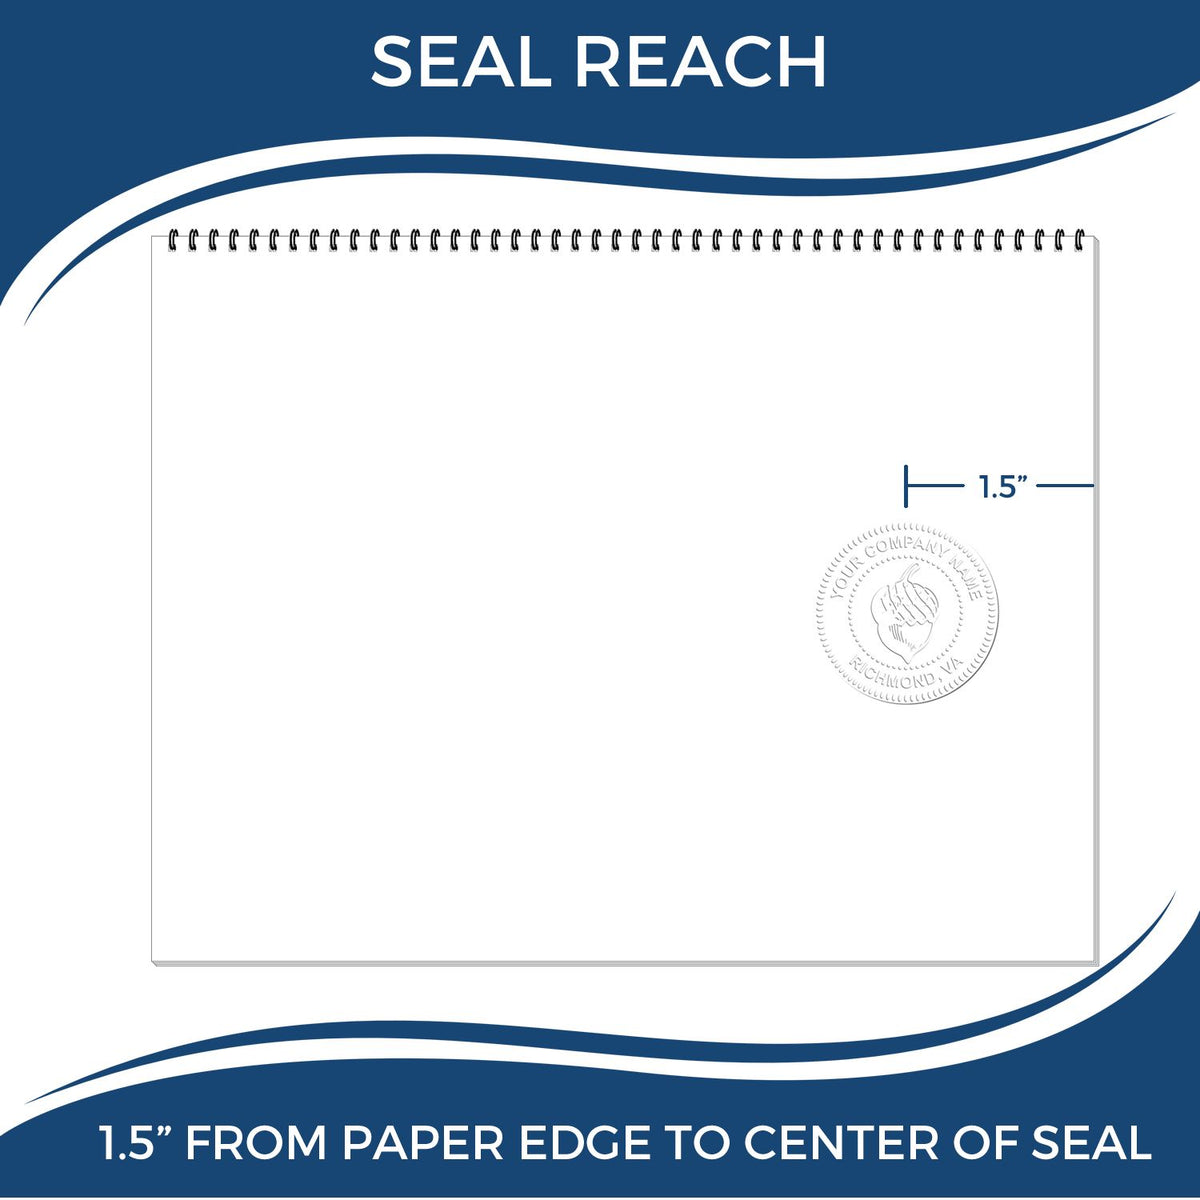 An infographic showing the seal reach which is represented by a ruler and a miniature seal image of the District of Columbia Architectural Seal Embosser